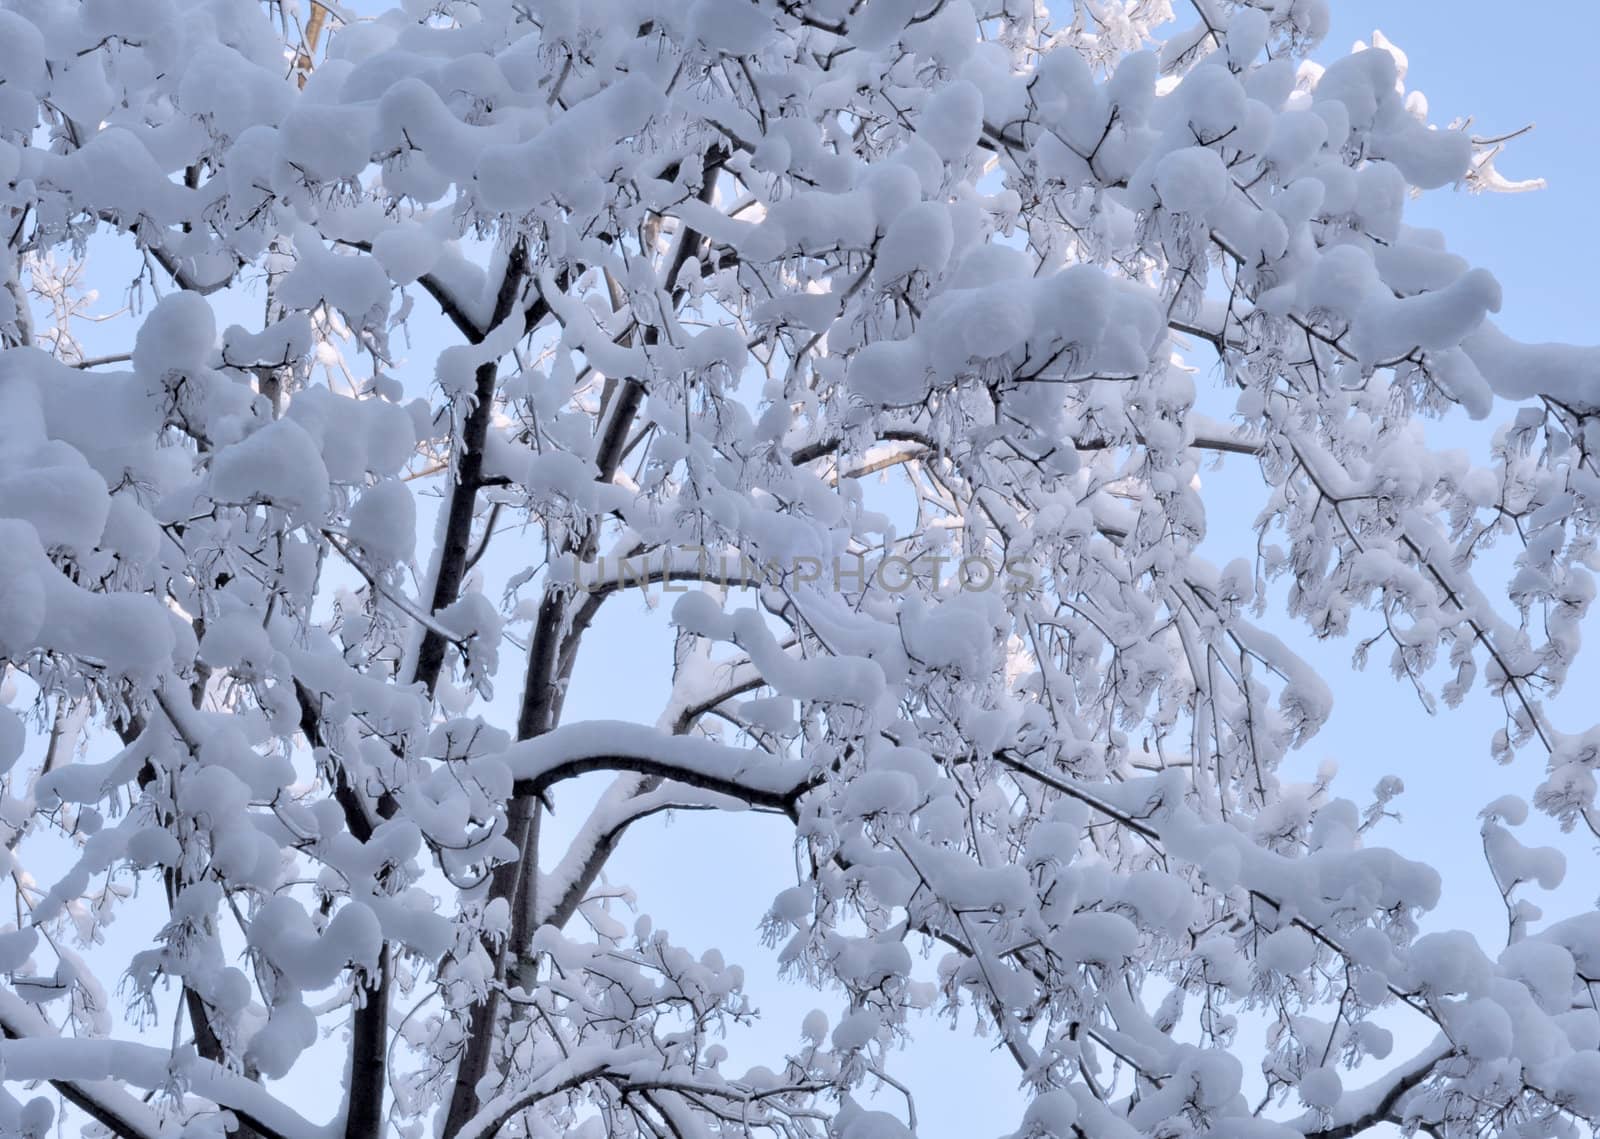 Snow and ice on branches by alexcoolok